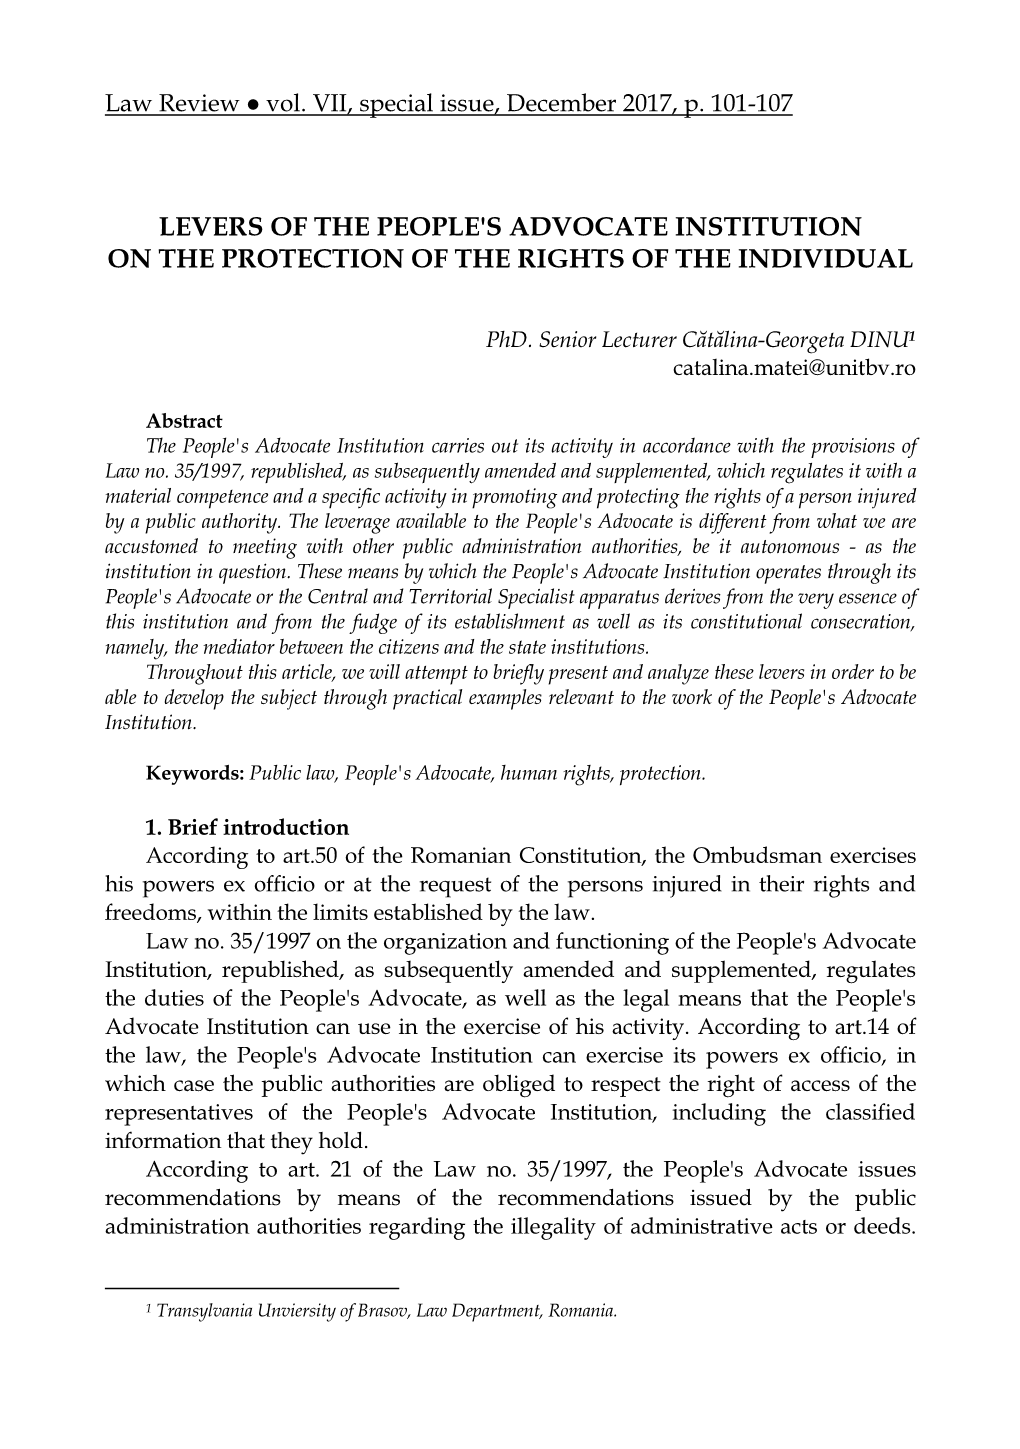 Levers of the People's Advocate Institution on the Protection of the Rights of the Individual